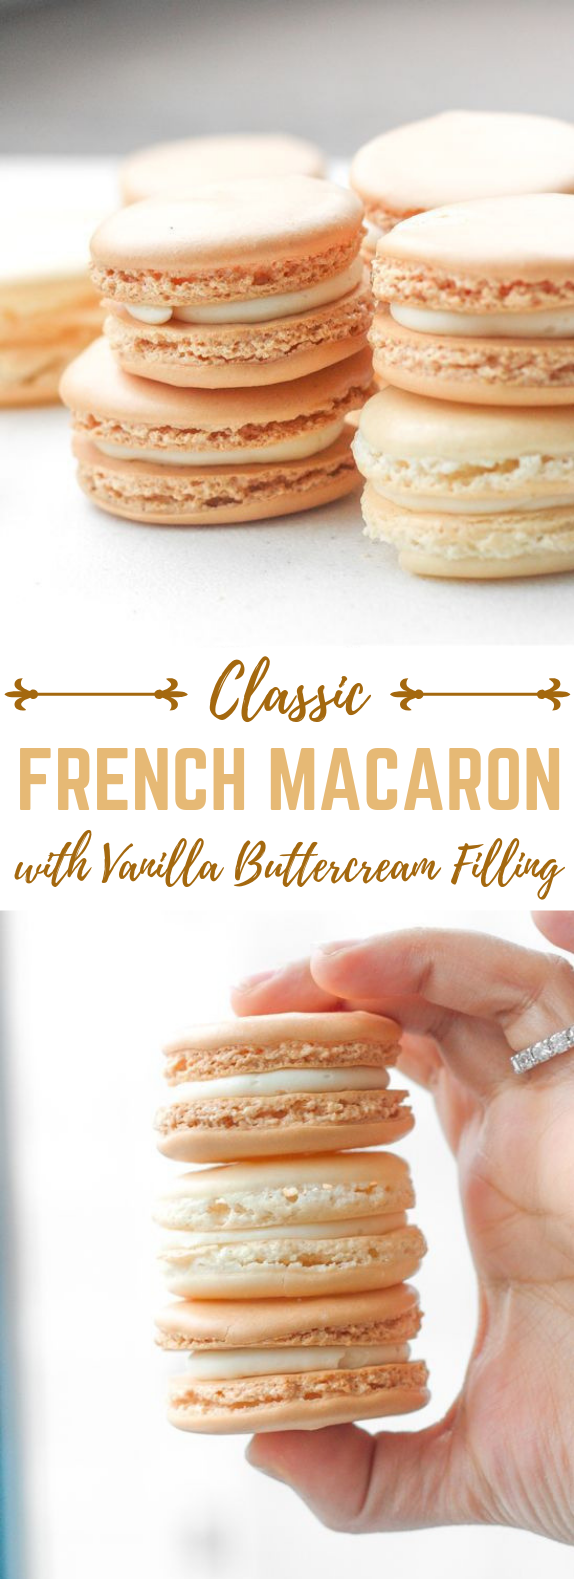 CLASSIC FRENCH MACARON WITH VANILLA BUTTERCREAM FILLING #sweets #bestdesserts